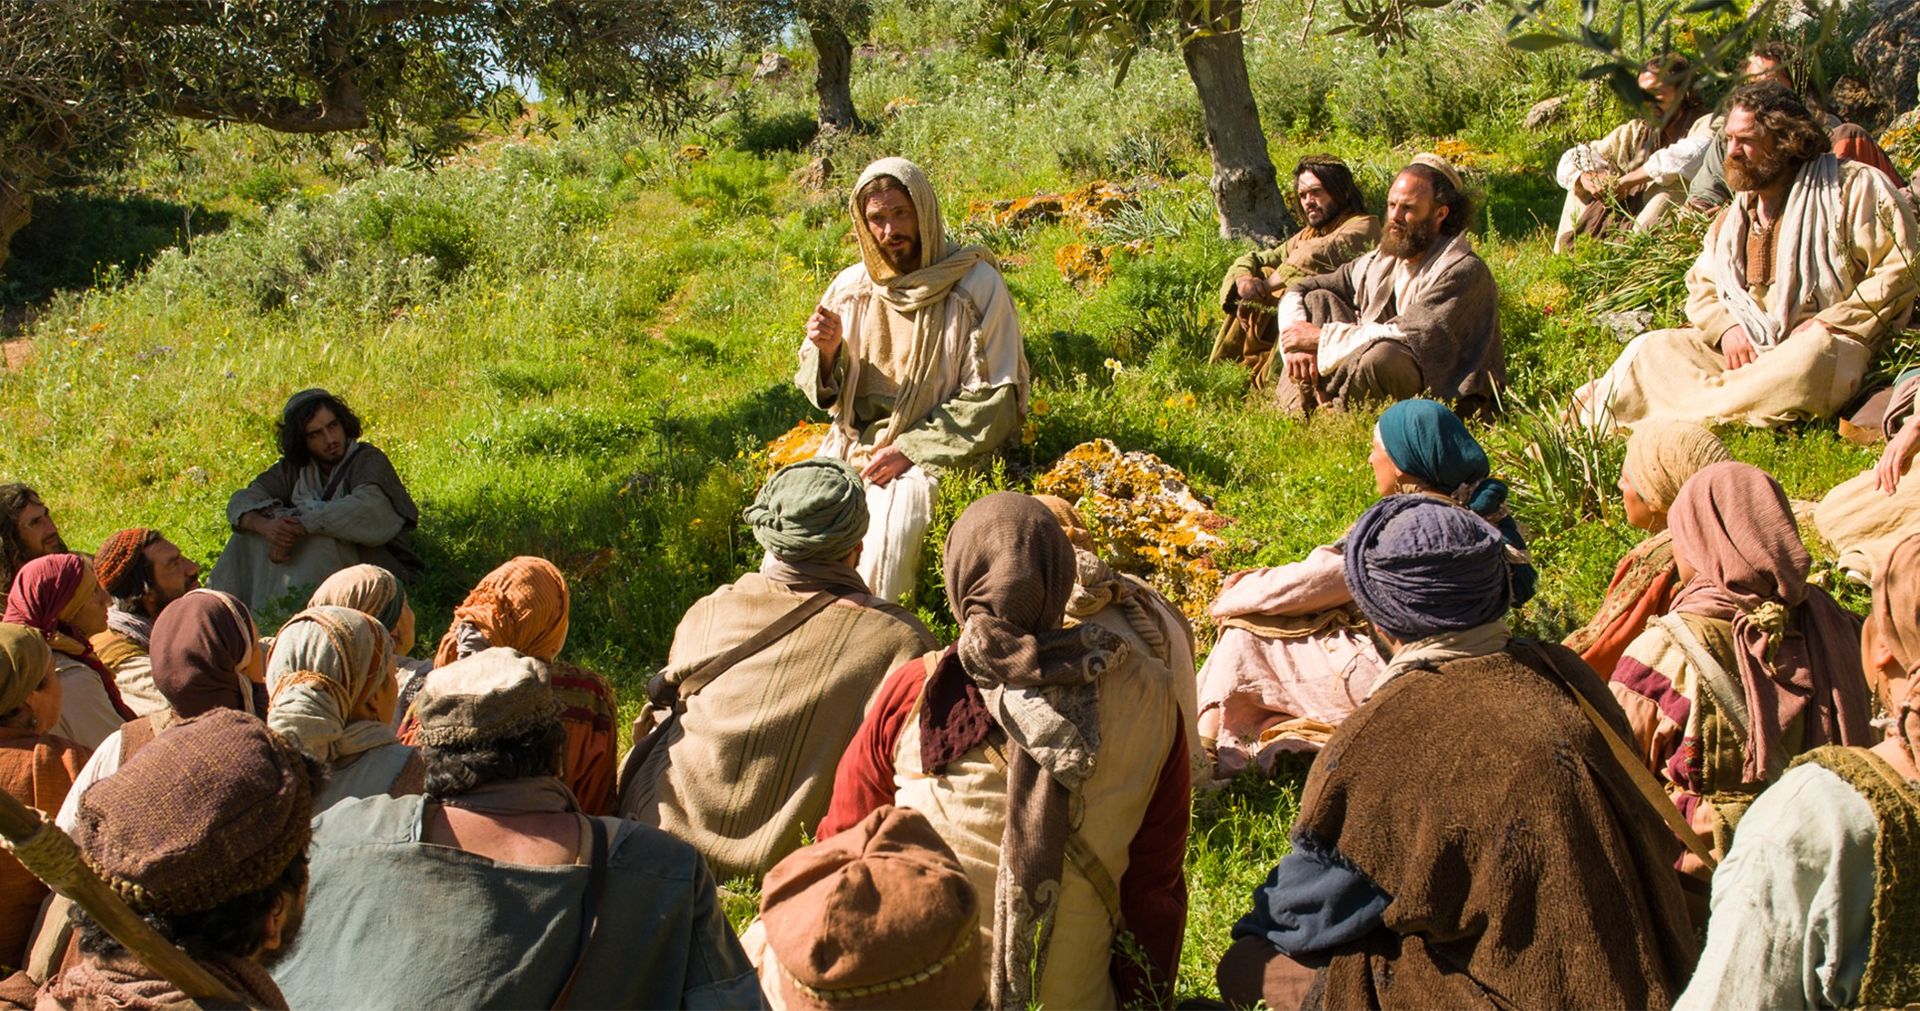 Jesus teaching a small group of people sitting on a green hill.